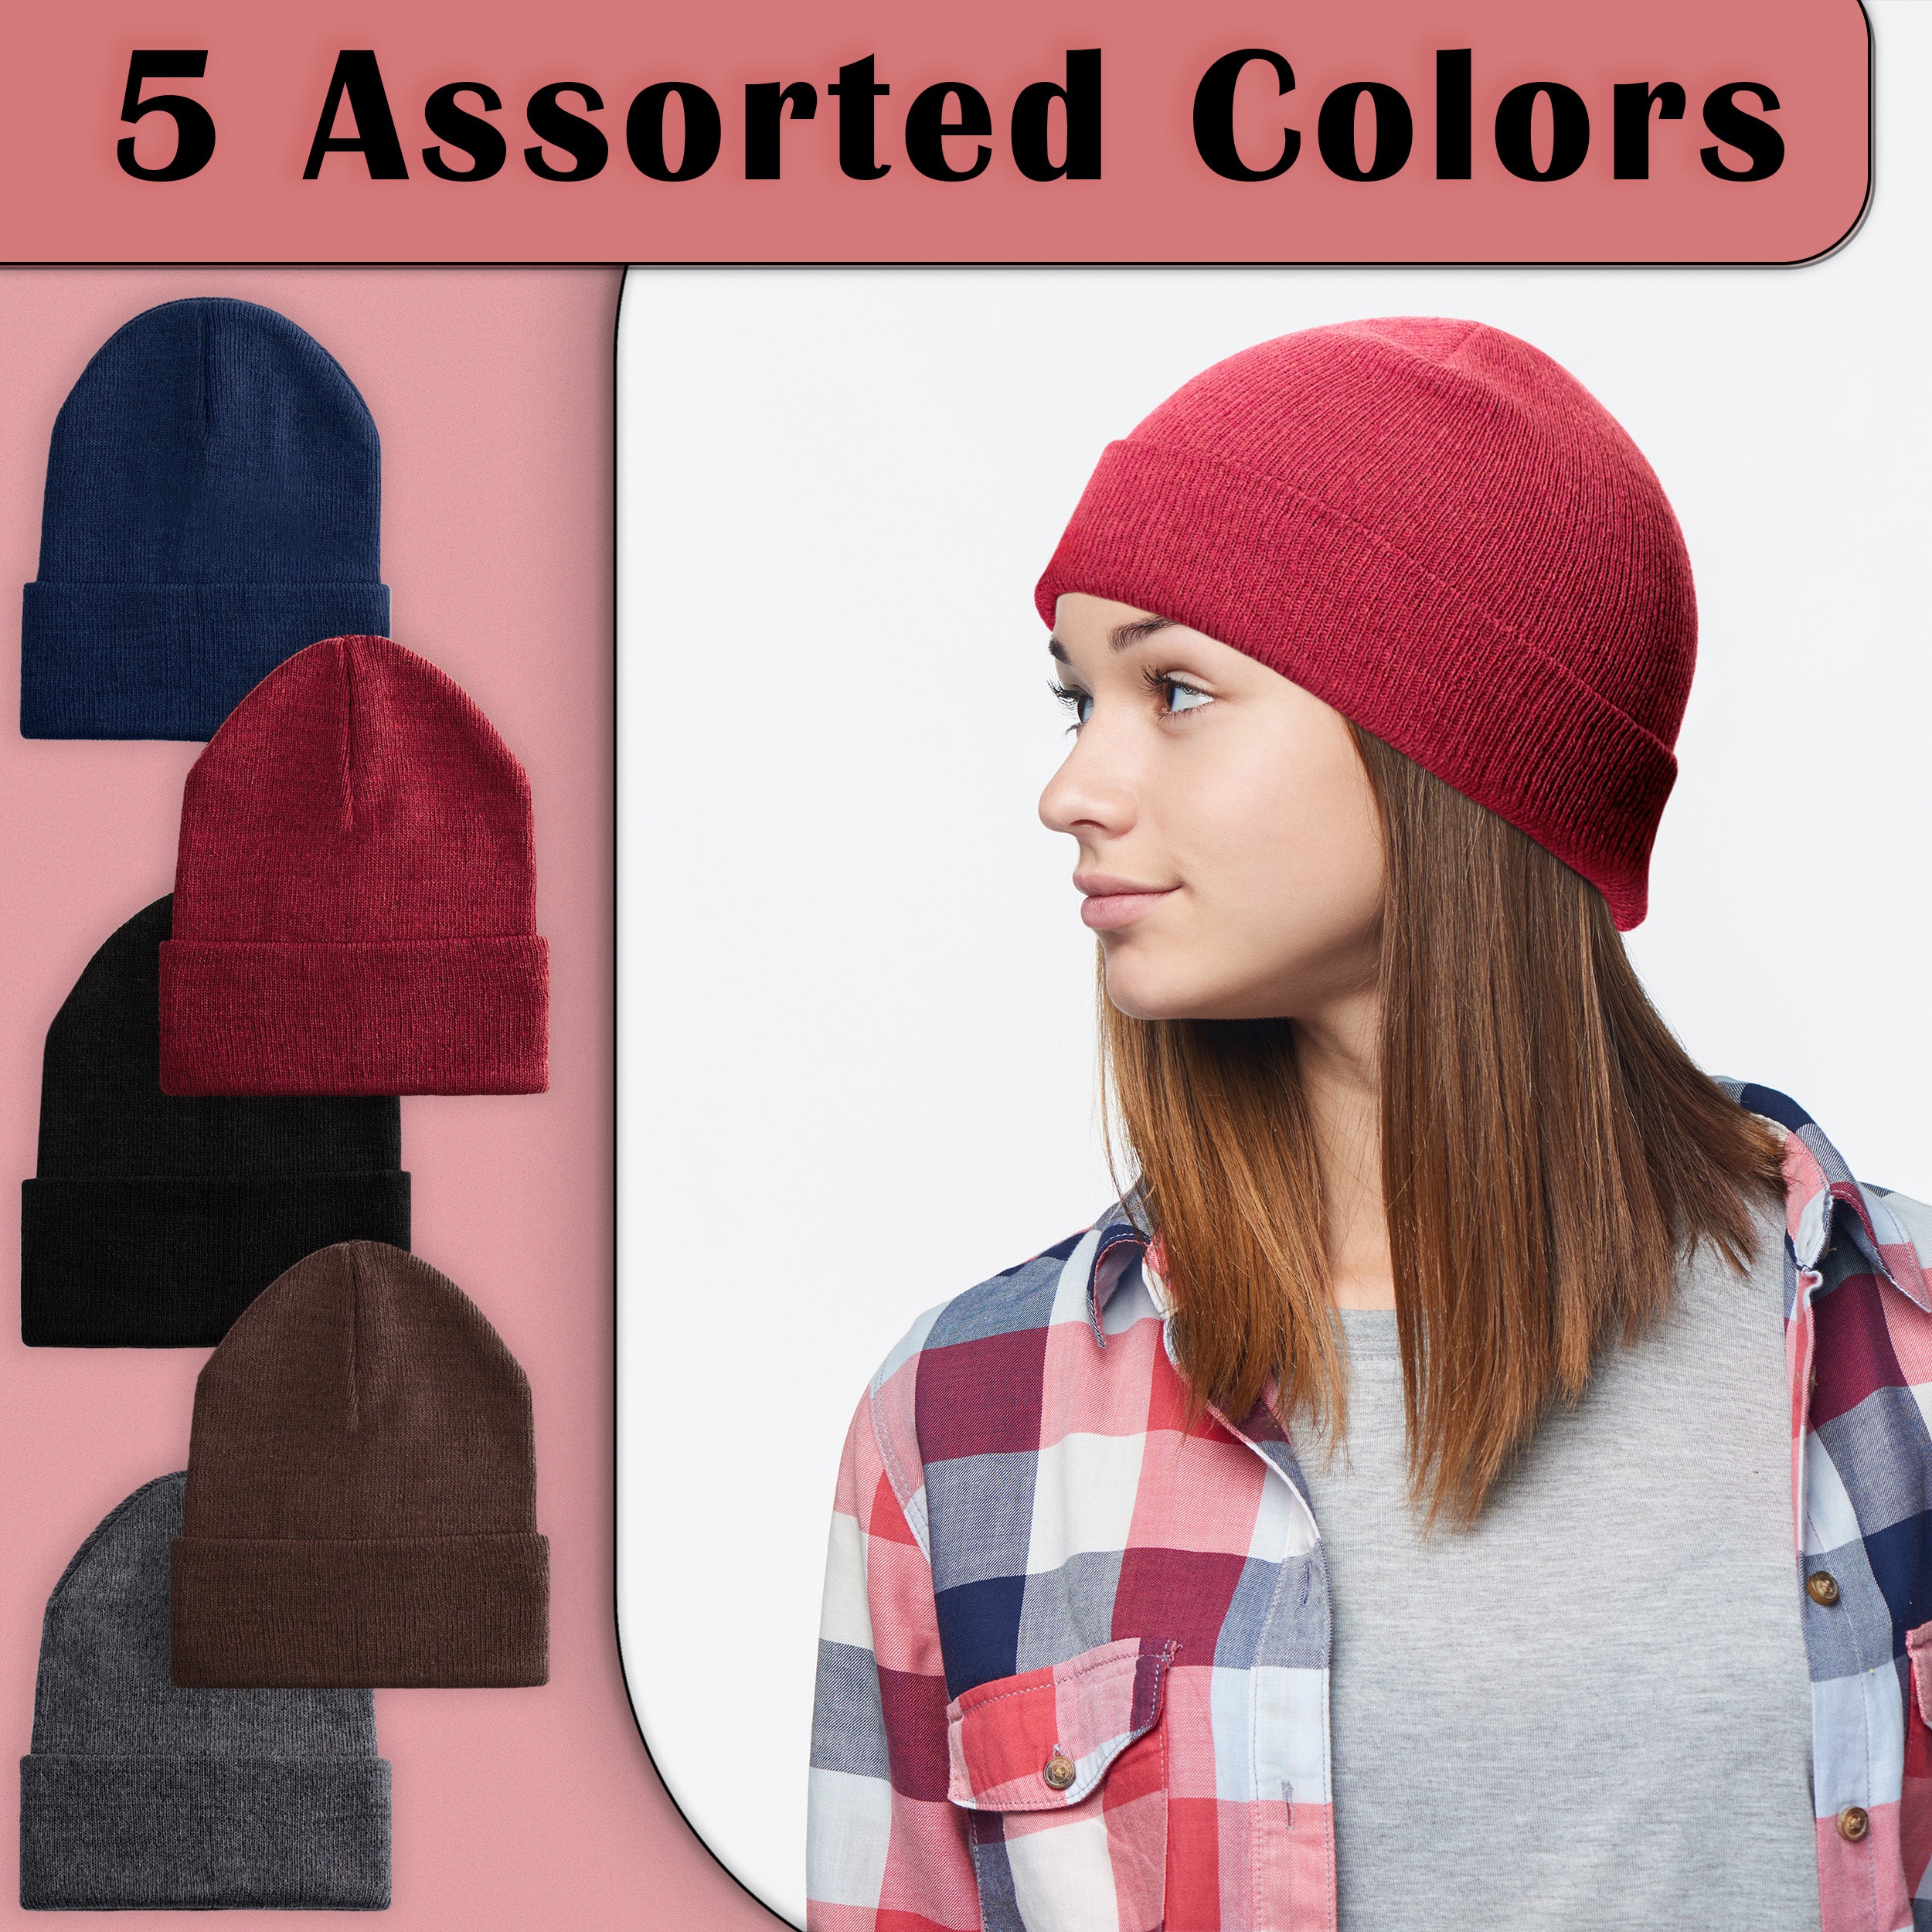 Unisex Winter Wholesale Beanie in 5 Assorted Colors - Bulk Case of 48